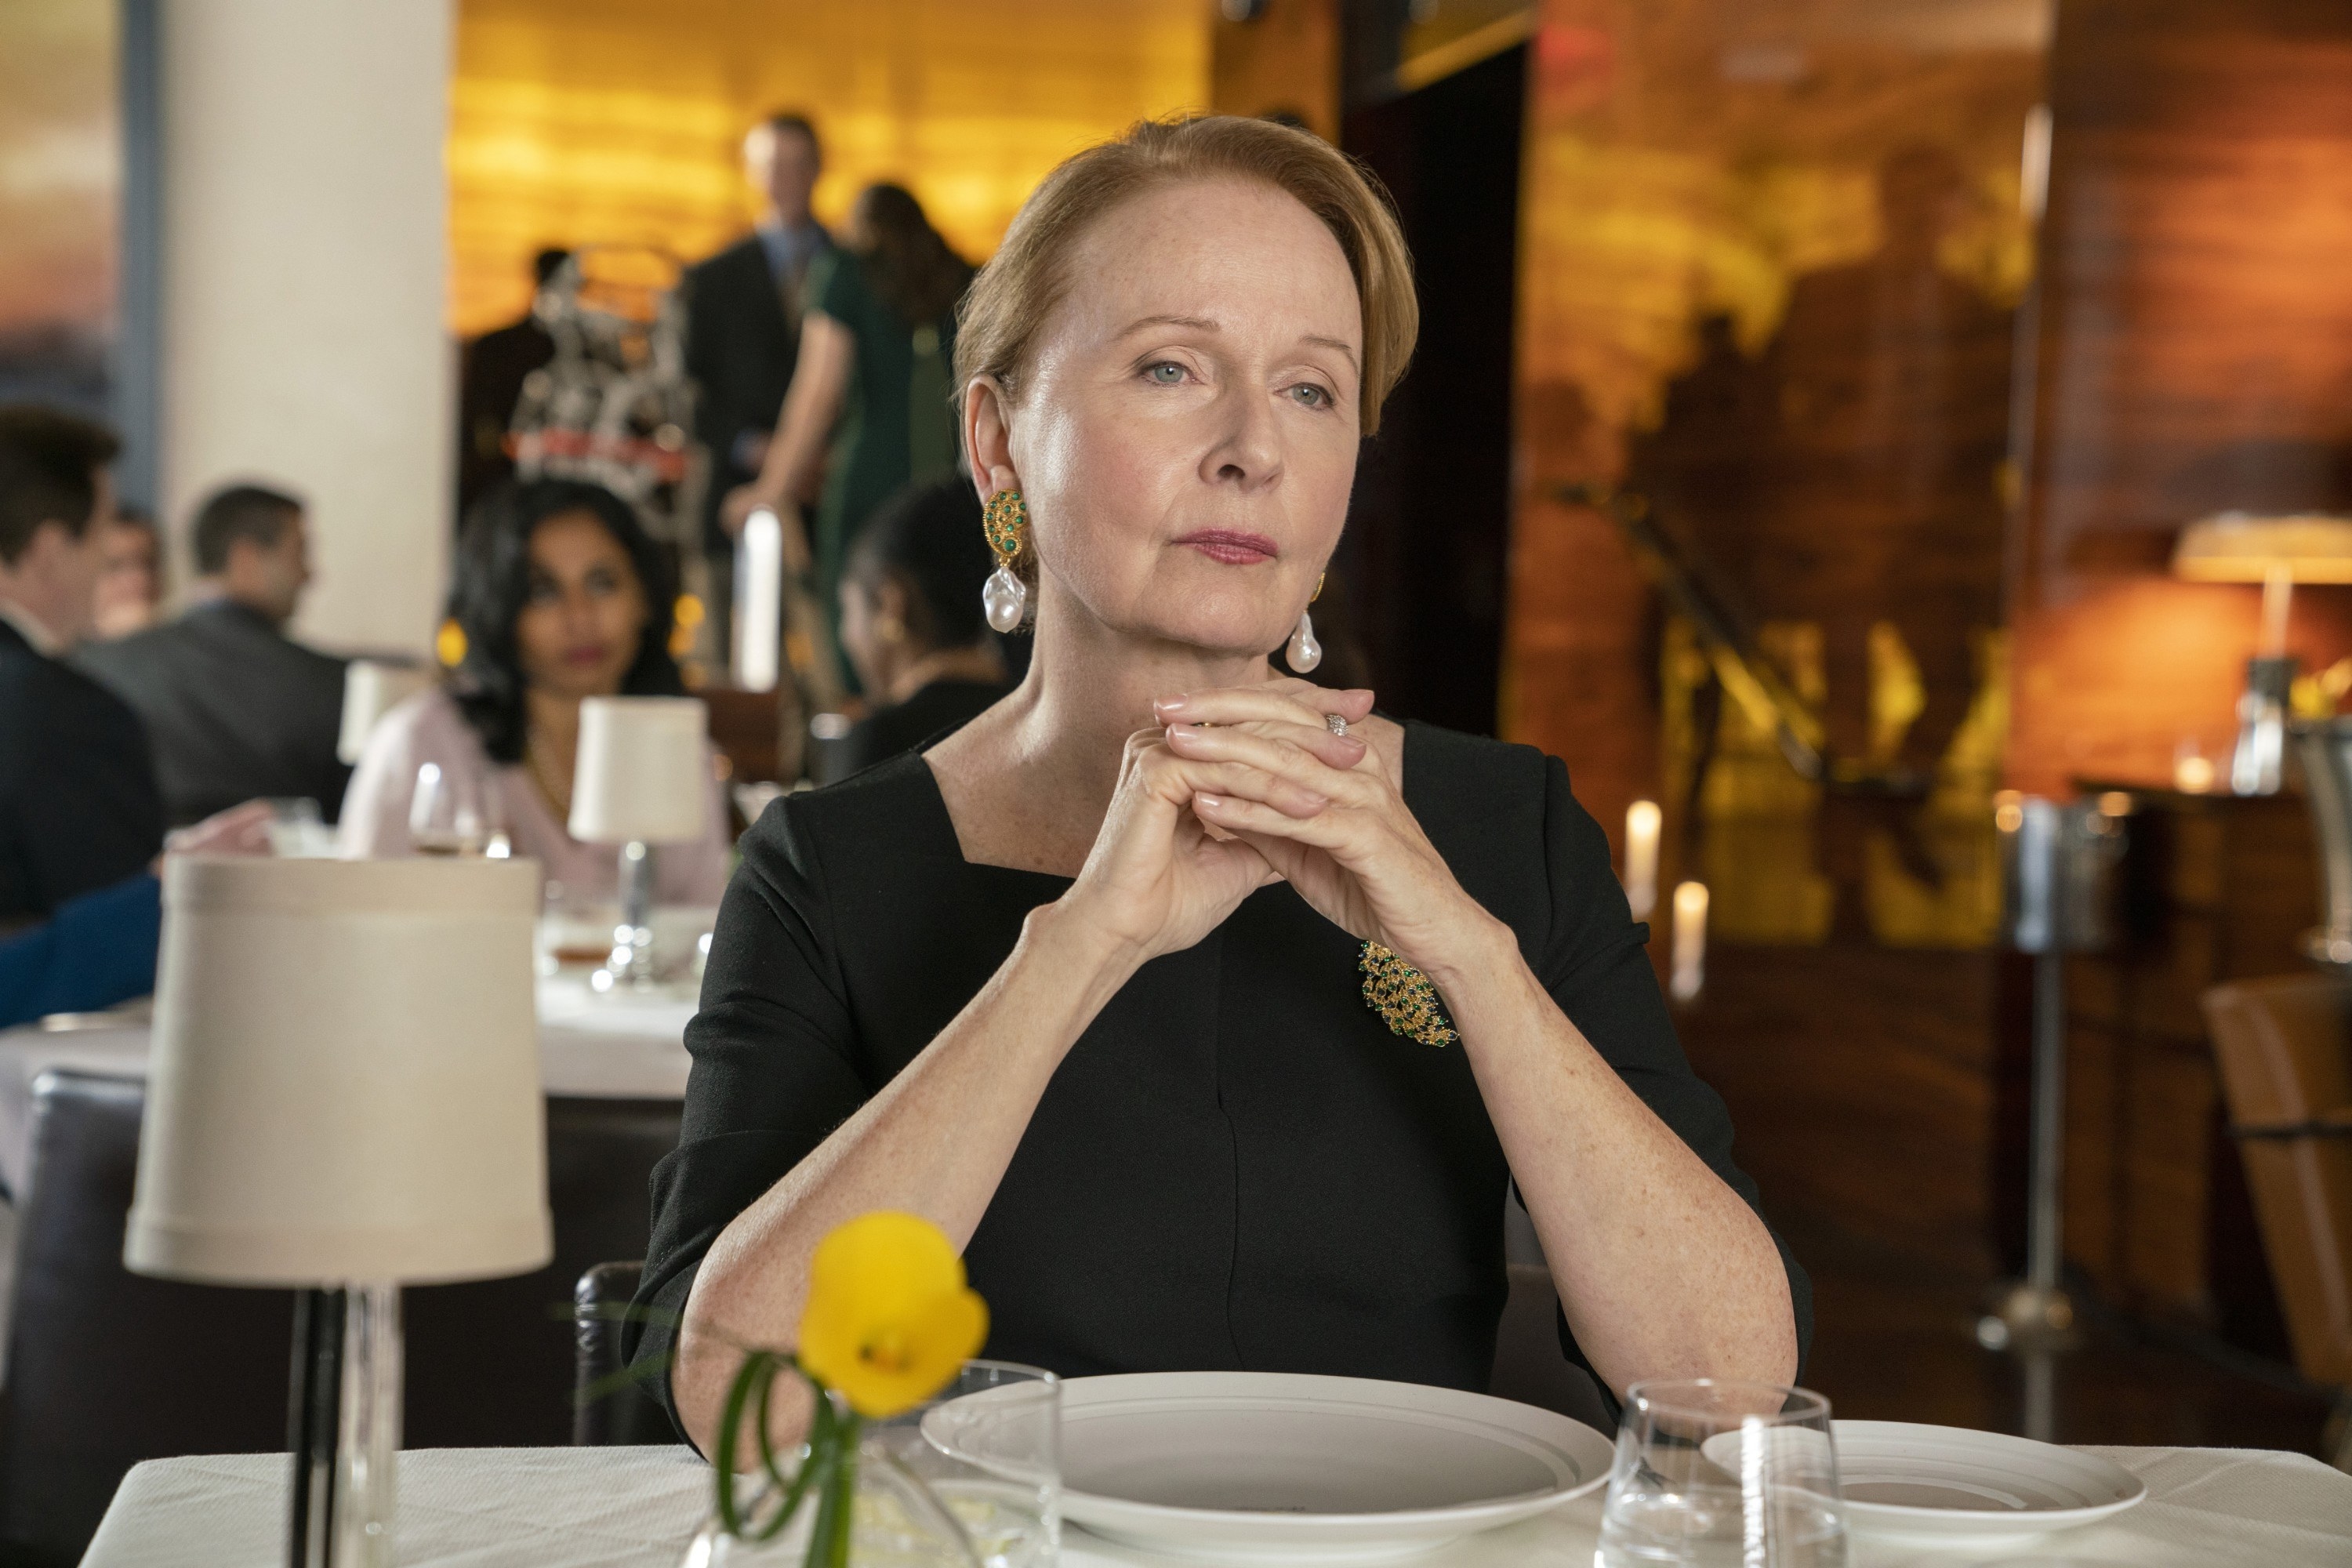 wearing an elegant dress with a square neckline and gaudy earrings and a brooch, Nora sits with her hands folded at a fancy restaurant table